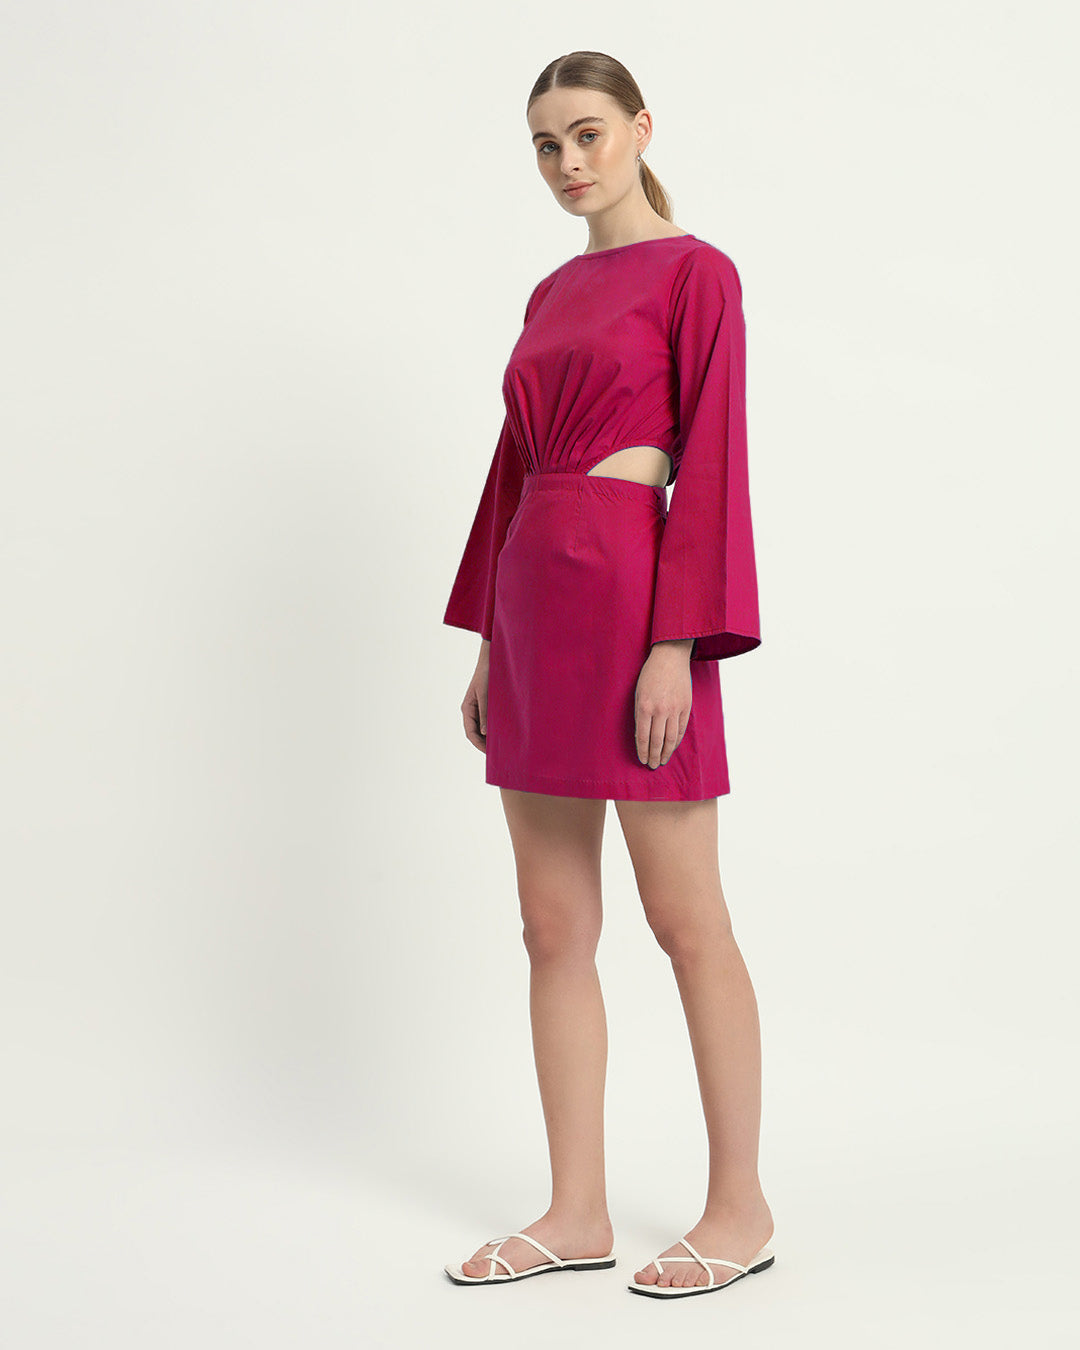 The Eloy Berry Cotton Dress